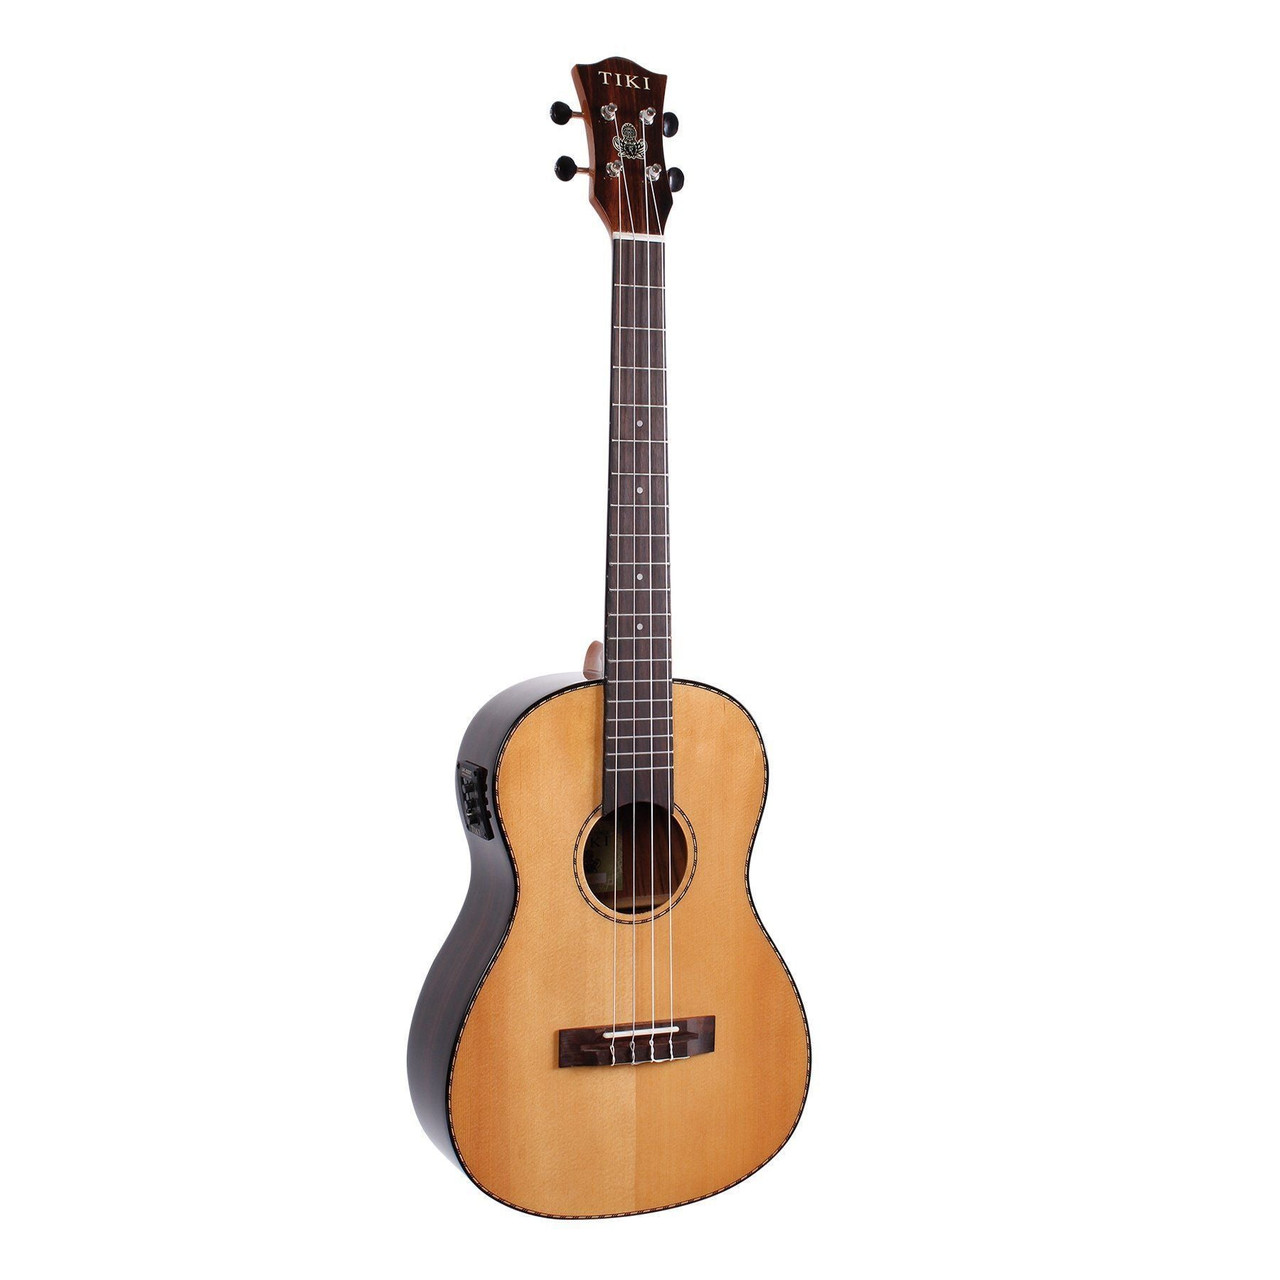 https://cdn.shopify.com/s/files/1/1636/6967/products/Tiki-22-Series-Spruce-Solid-Top-Electric-Baritone-Ukulele-with-Hard-Case-Natural-Gloss-TSB-22P-NGL-3_c433787f-0215-4bc8-a7d5-a1cfff68b32b.jpg?v=1630775413